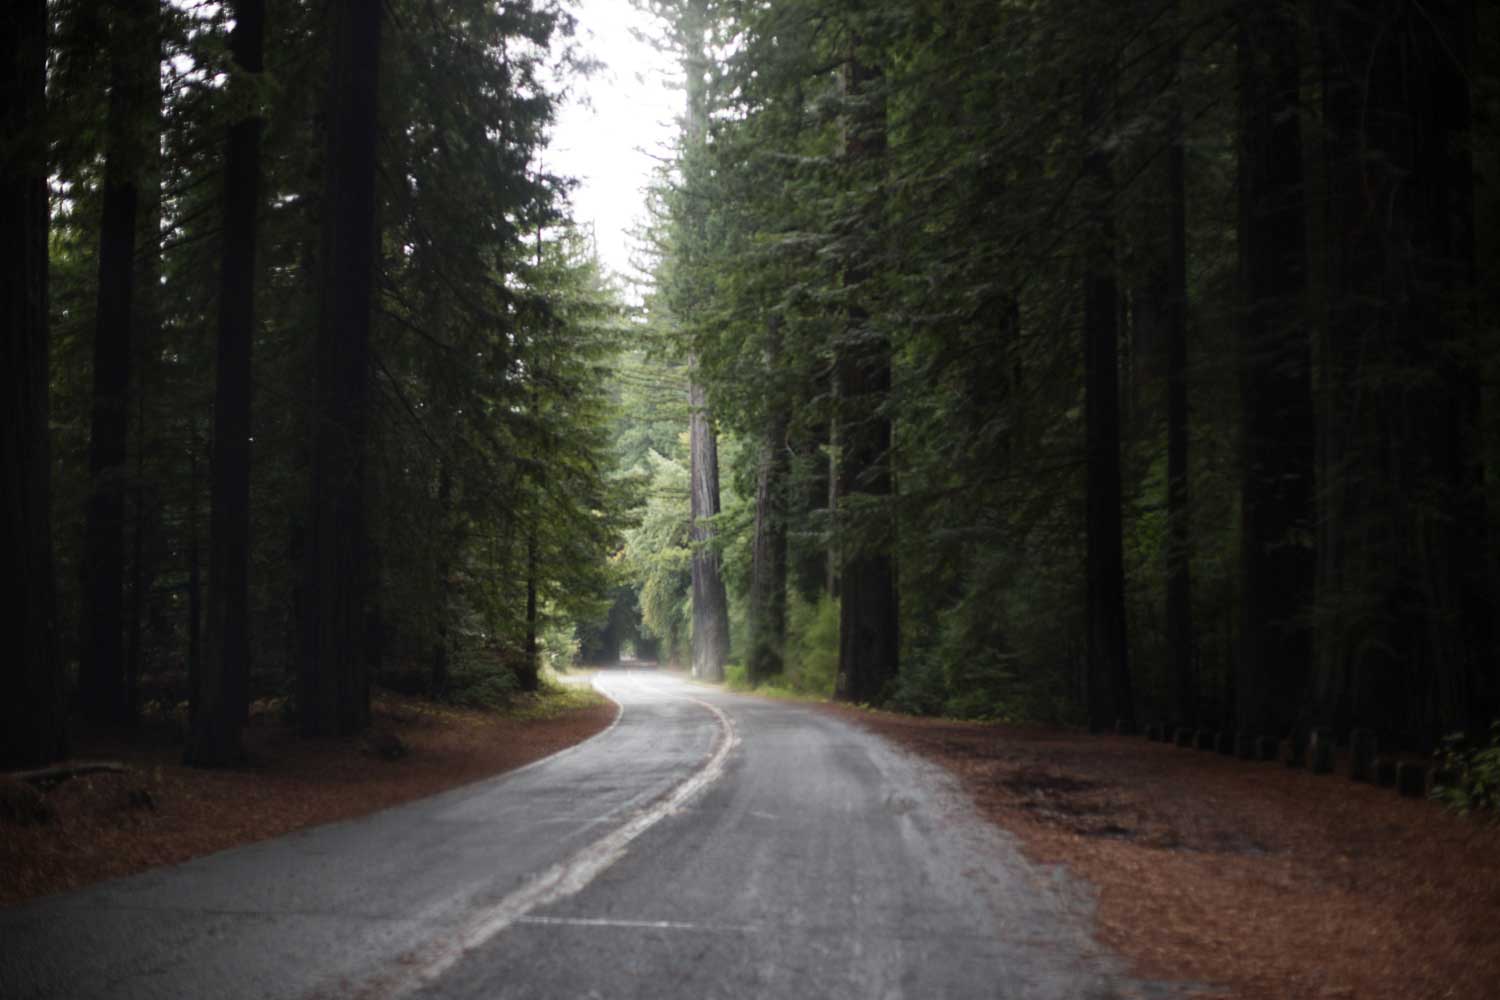 The Redwood Highway, out of focus.